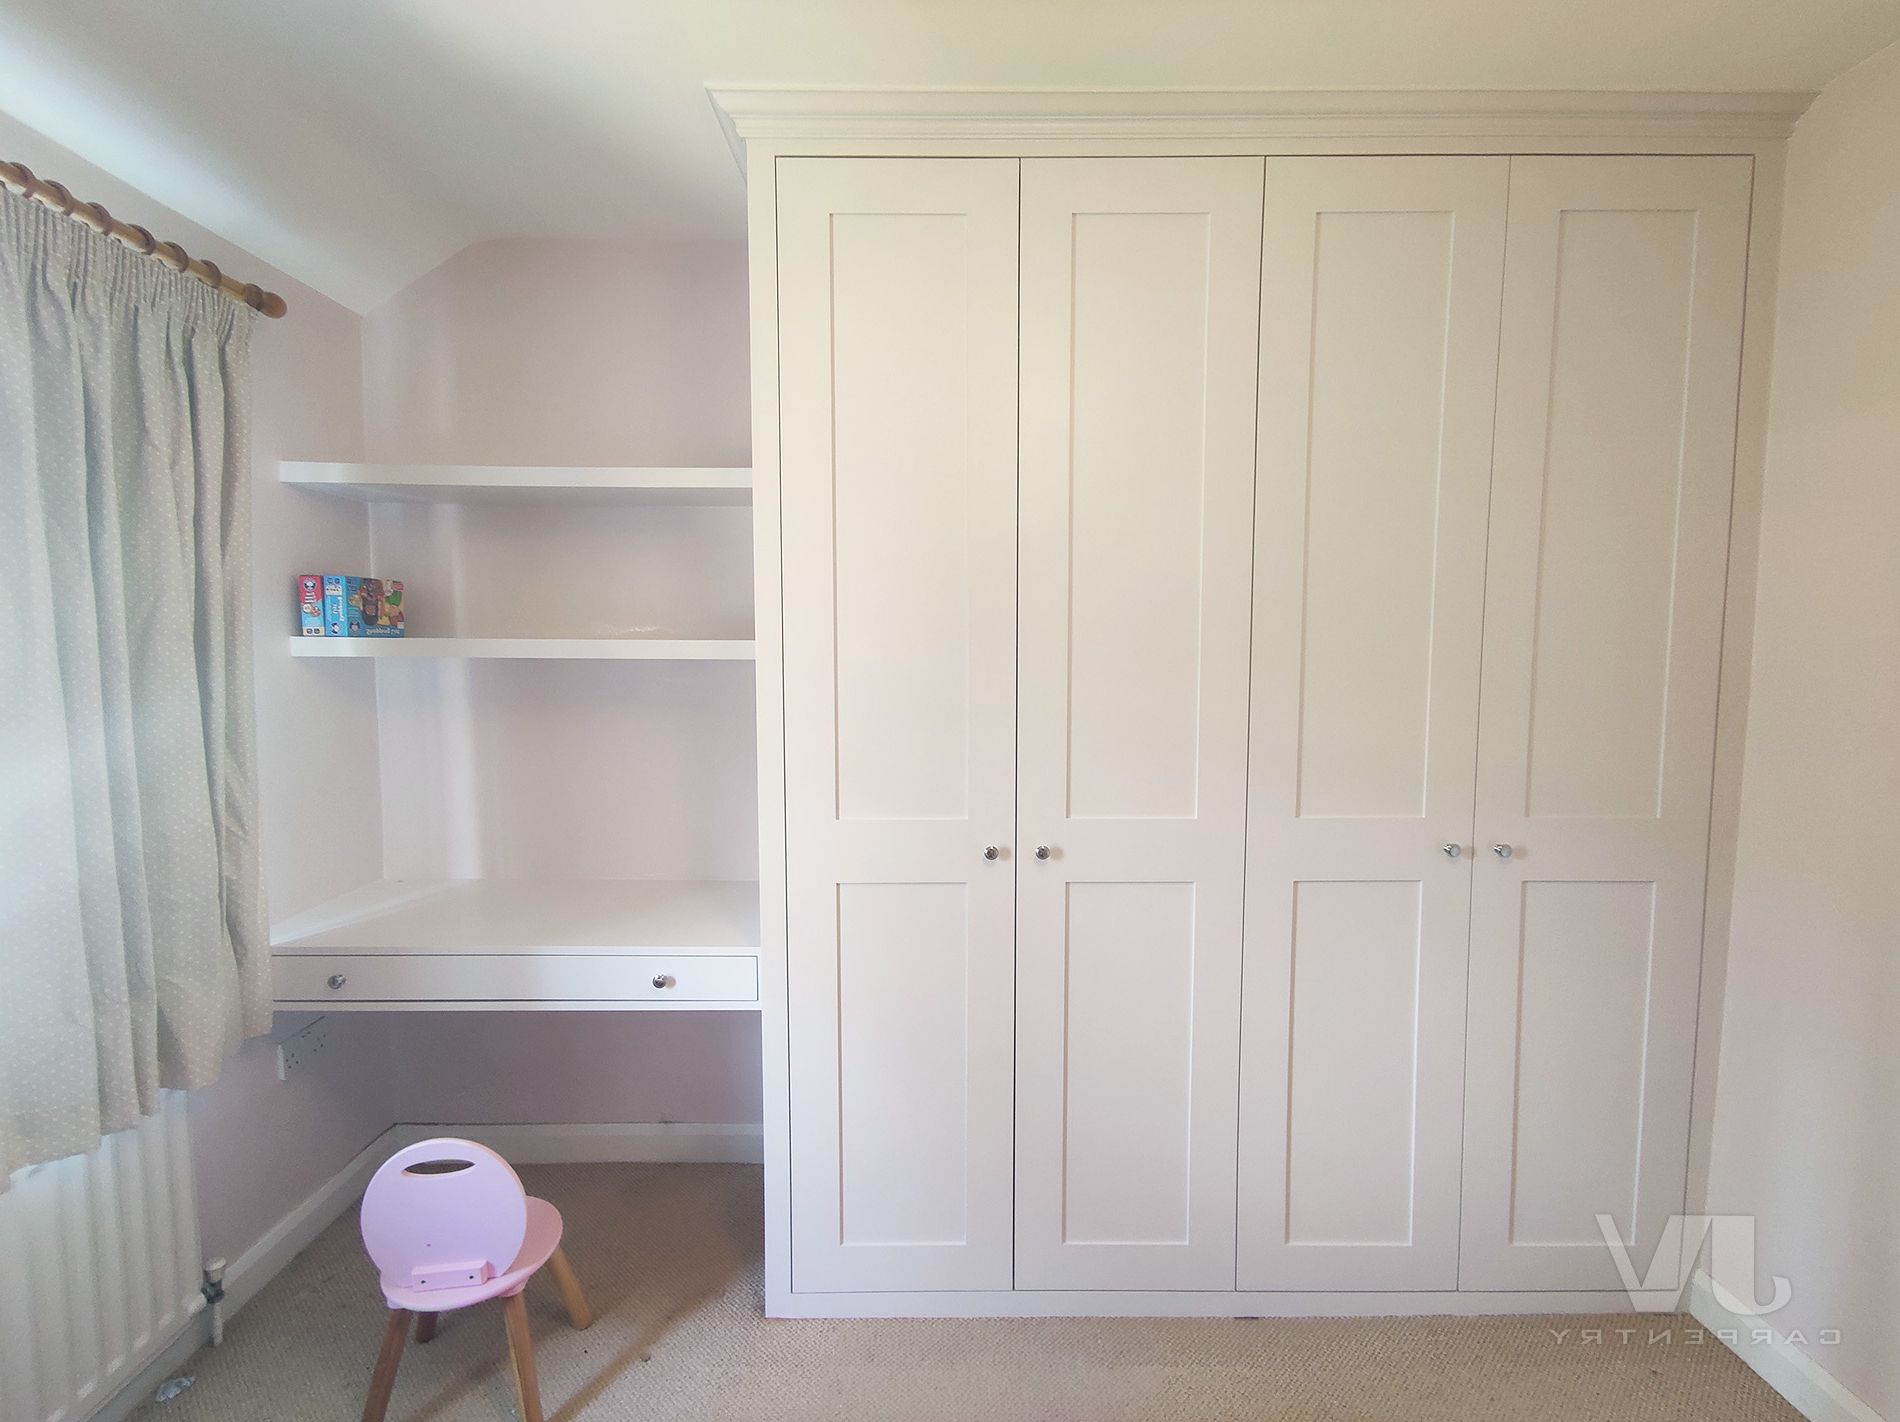 9 Fitted Wardrobes With Dressing Table Ideas | Jv Carpentry In Wardrobes And Dressing Tables (View 3 of 20)